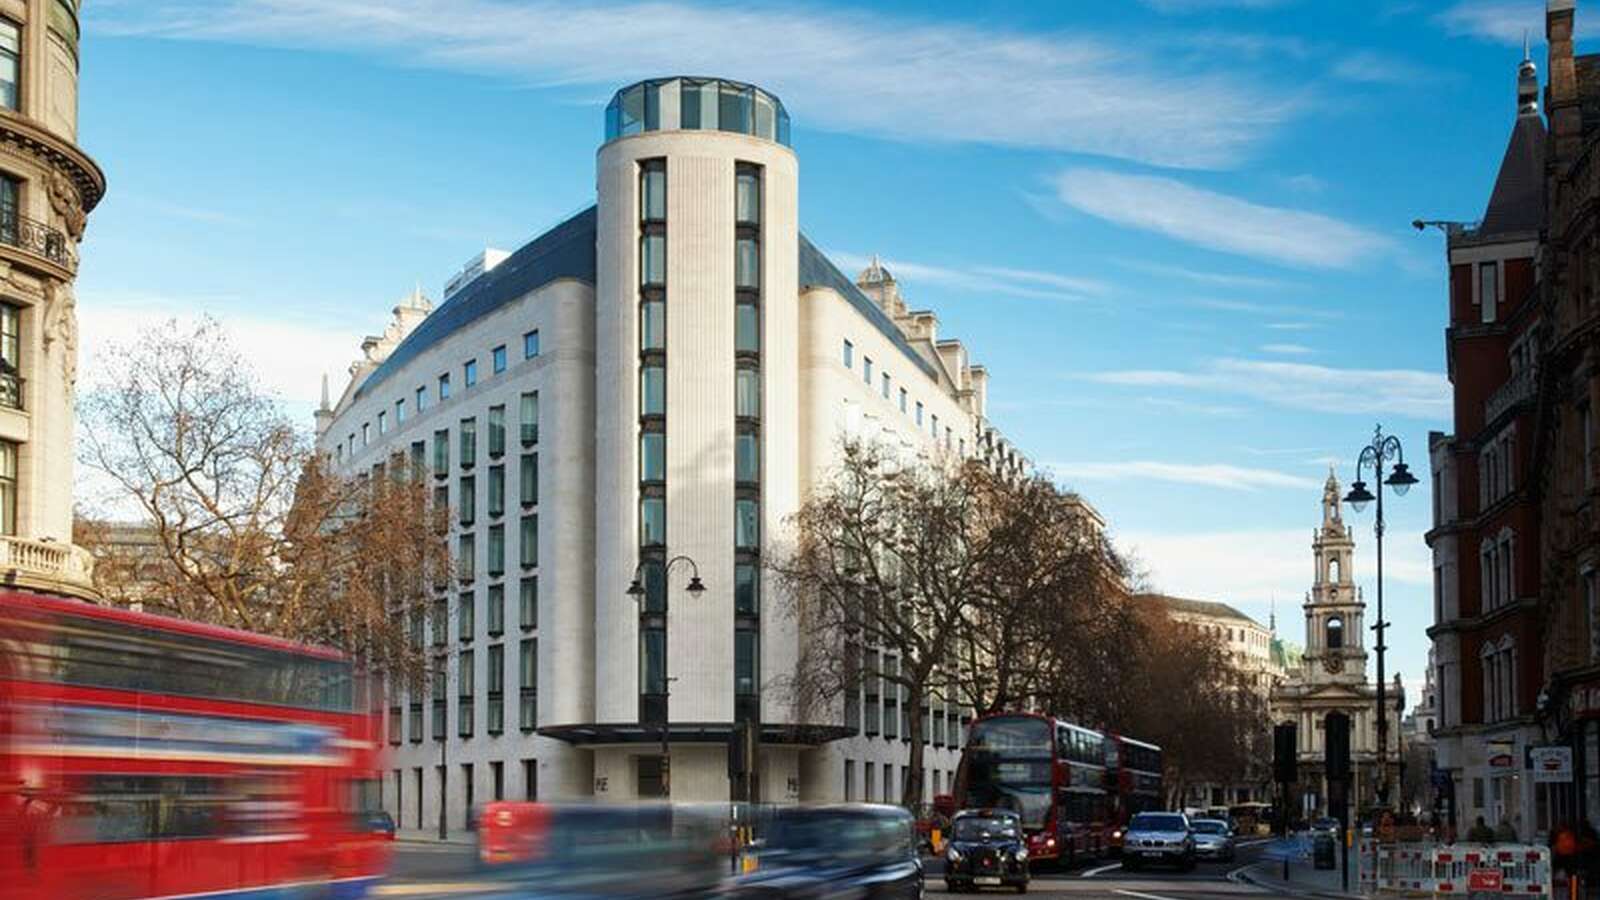 ME Hotel - Leading Hotel in the Heart of London